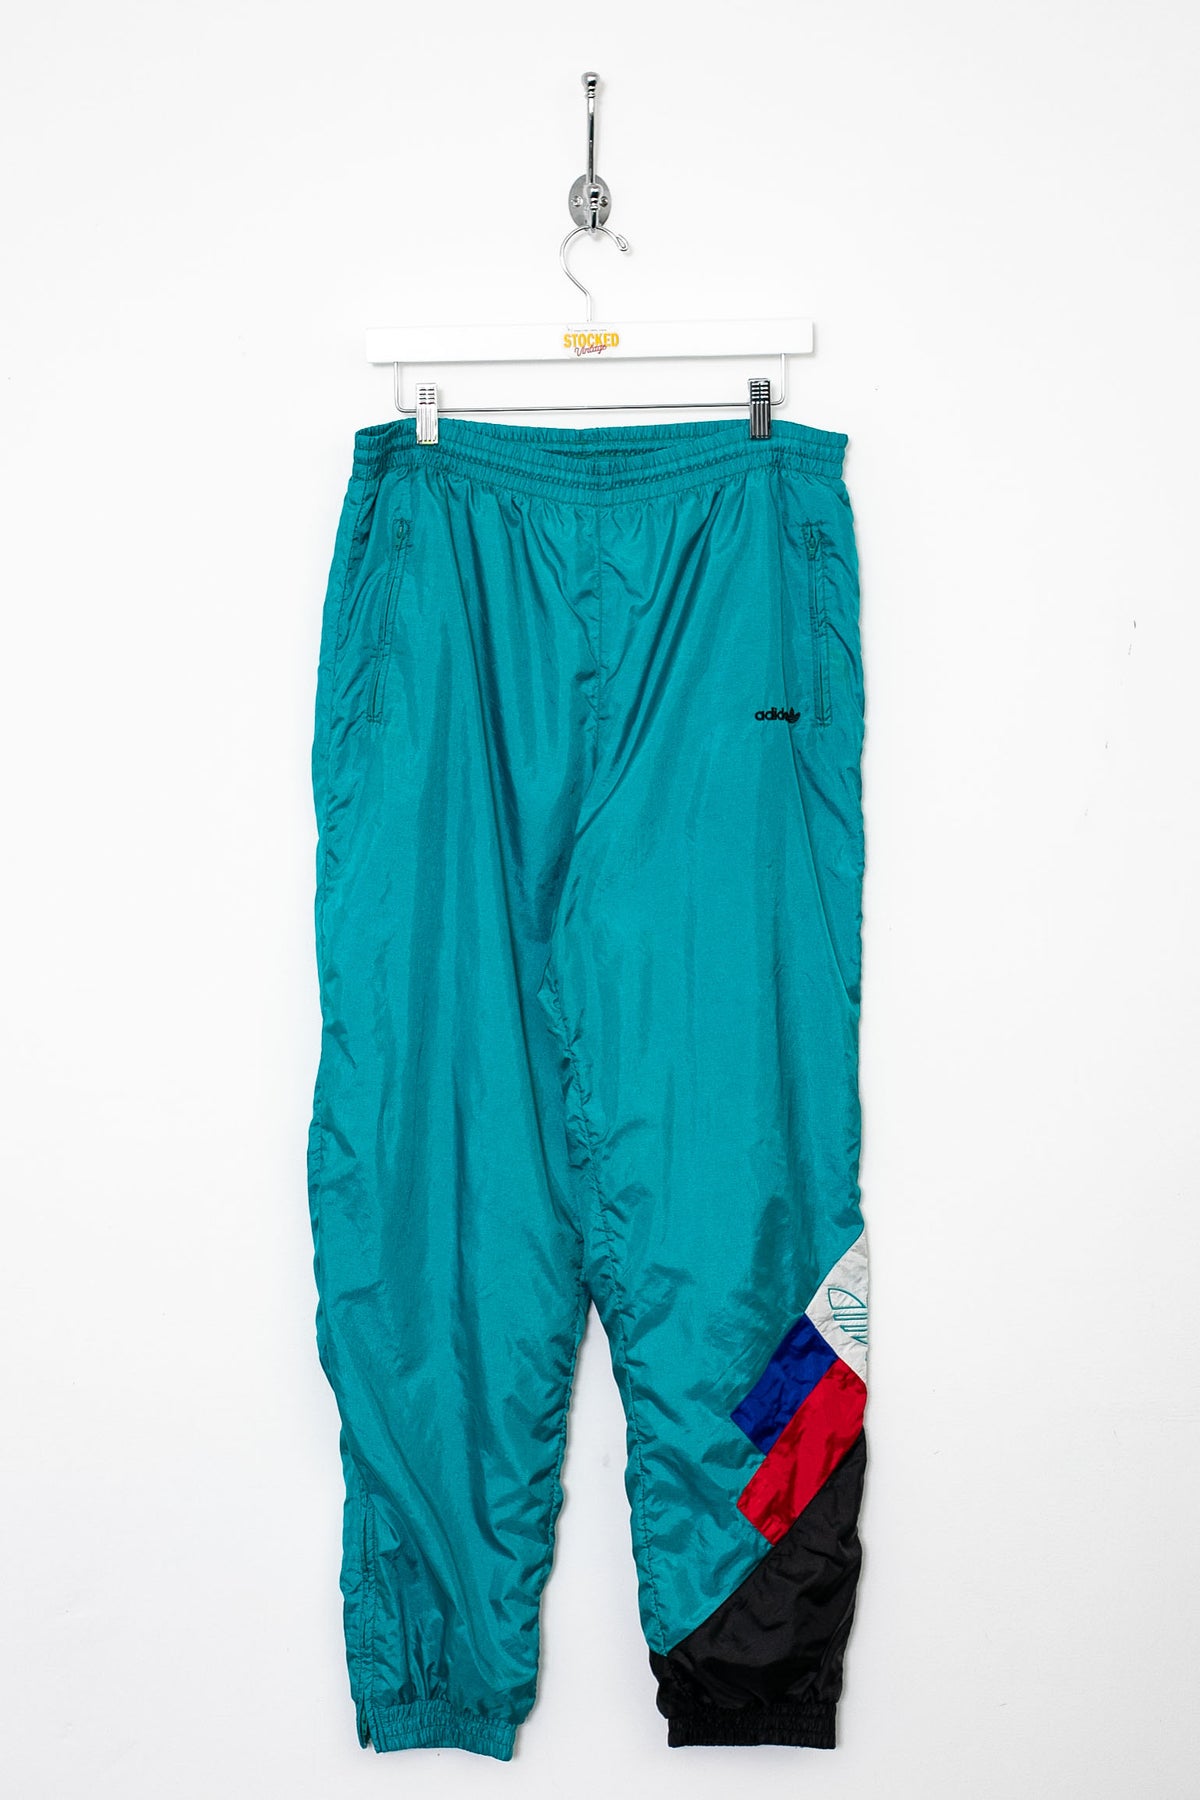 90s Adidas Tracksuit Bottoms (M)